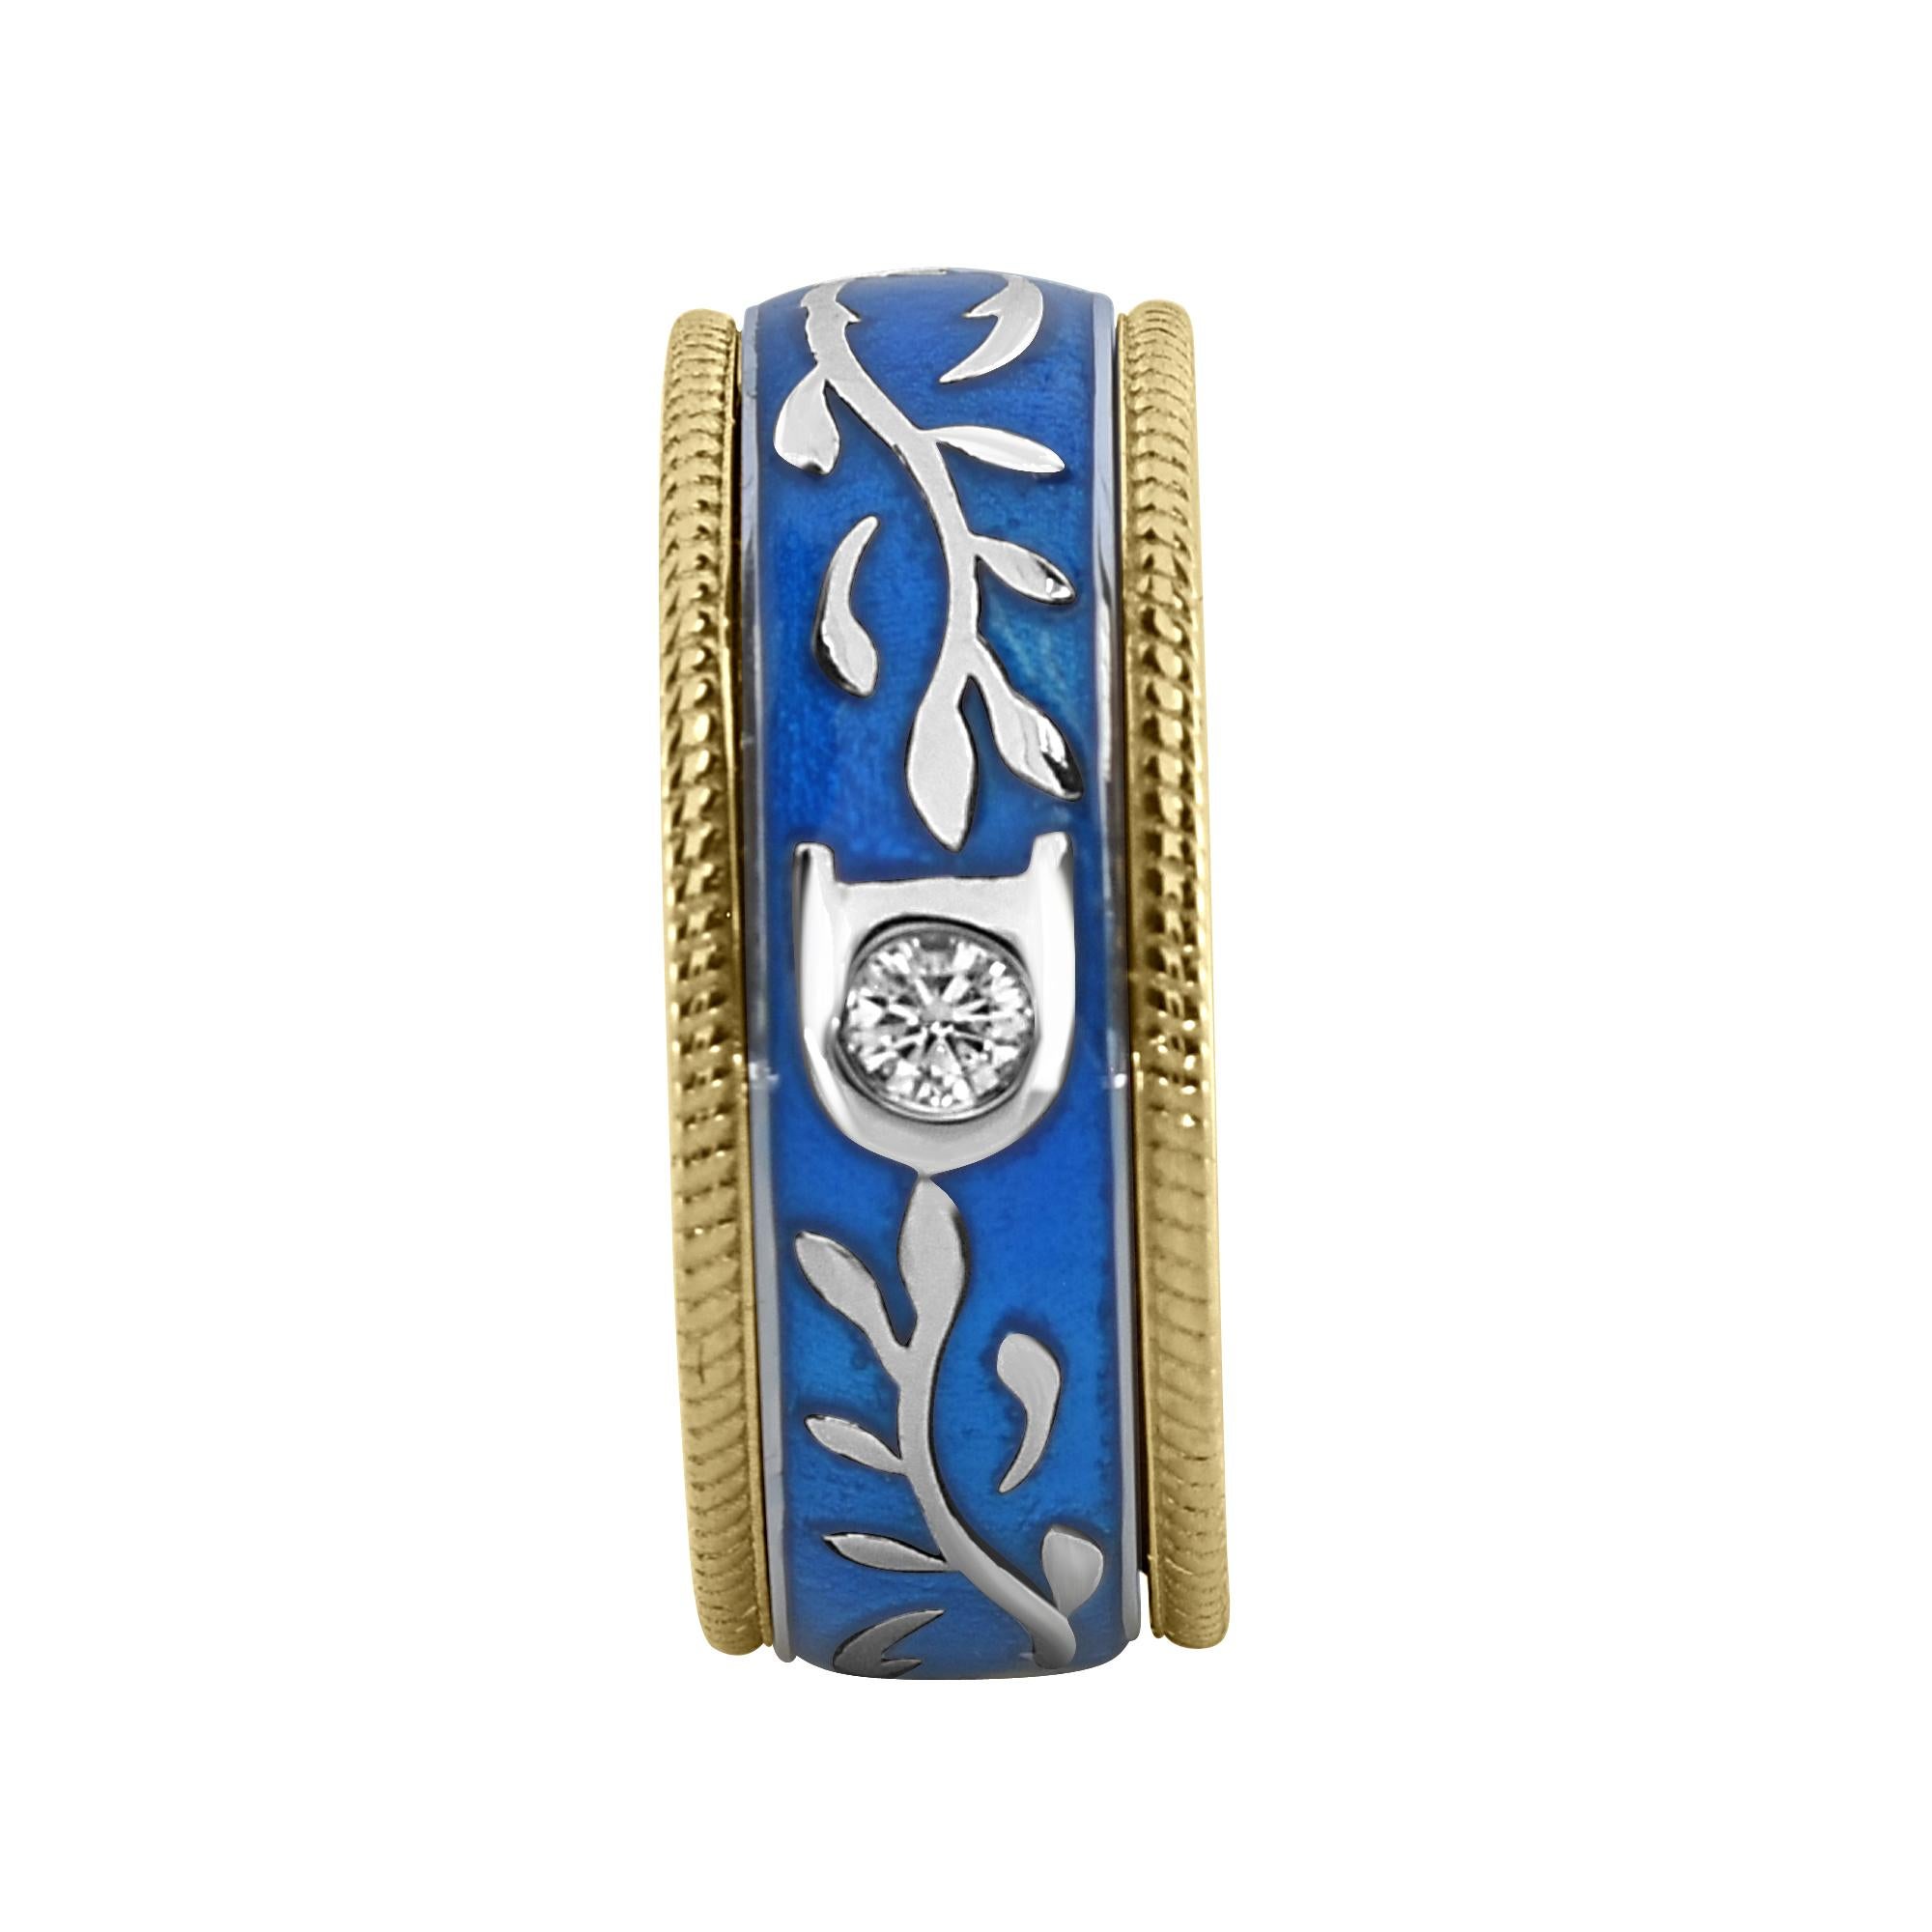 0.08 Carat White Diamond Enamel Floral Motif Ring set in 18K Yellow Gold.
This stunning ring made by Shimon's Creations enhanced with a 0.08 carat white diamond. This beautiful ring features a floral embellished motif and edged with upper and lower